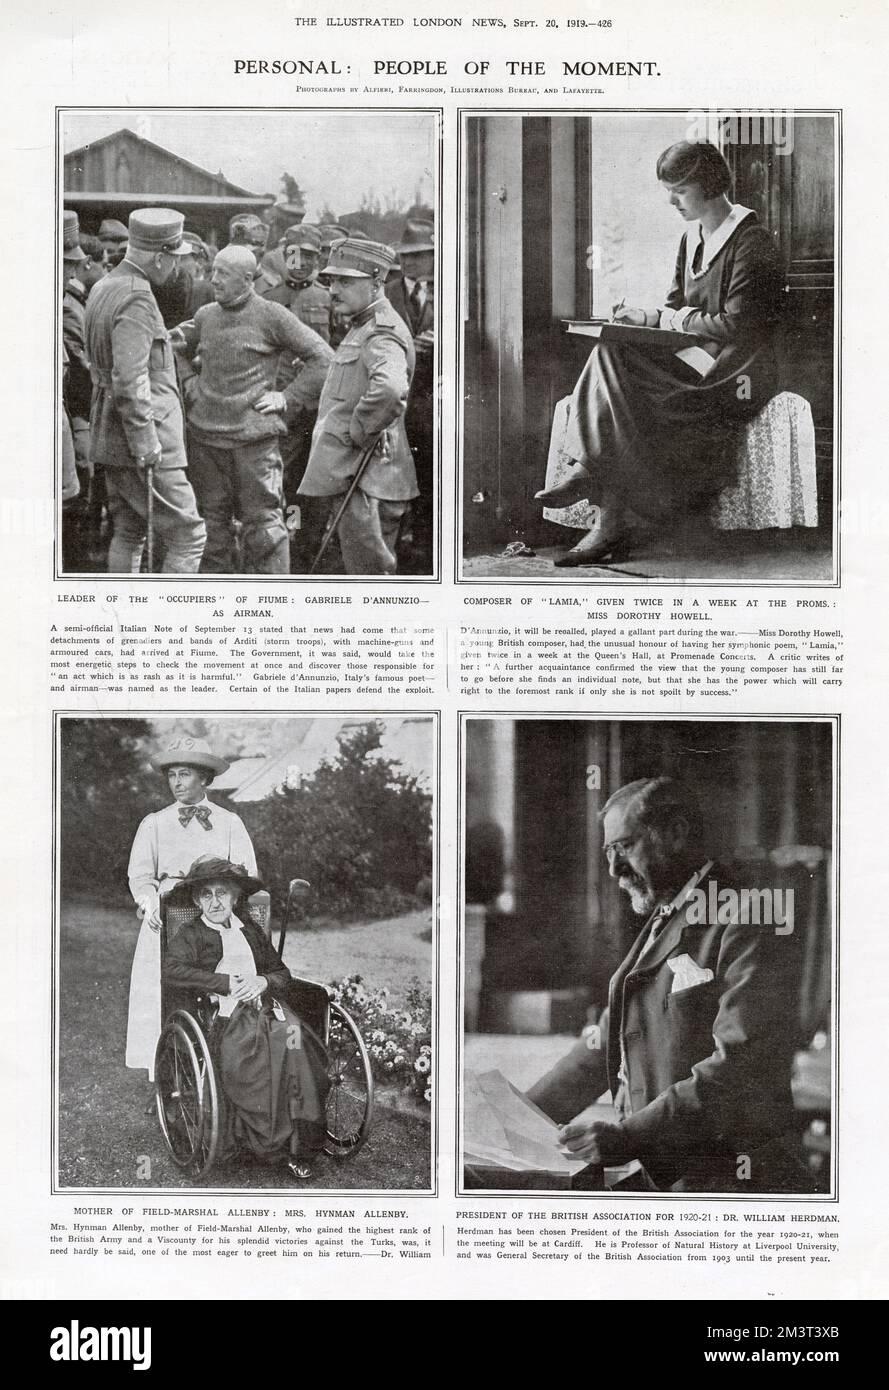 People of the Moment. Clockwise from top left: Leader of the 'occupiers' of Fiume, Gabriele D'Annunzio; composer of 'Lamia', played at the Proms, Miss Dorothy Howell; President of the Royal Association for 1920-21, Dr William Herdman; mother of Field-Marshal Allenby, Mrs Hynman Allenby. Stock Photo